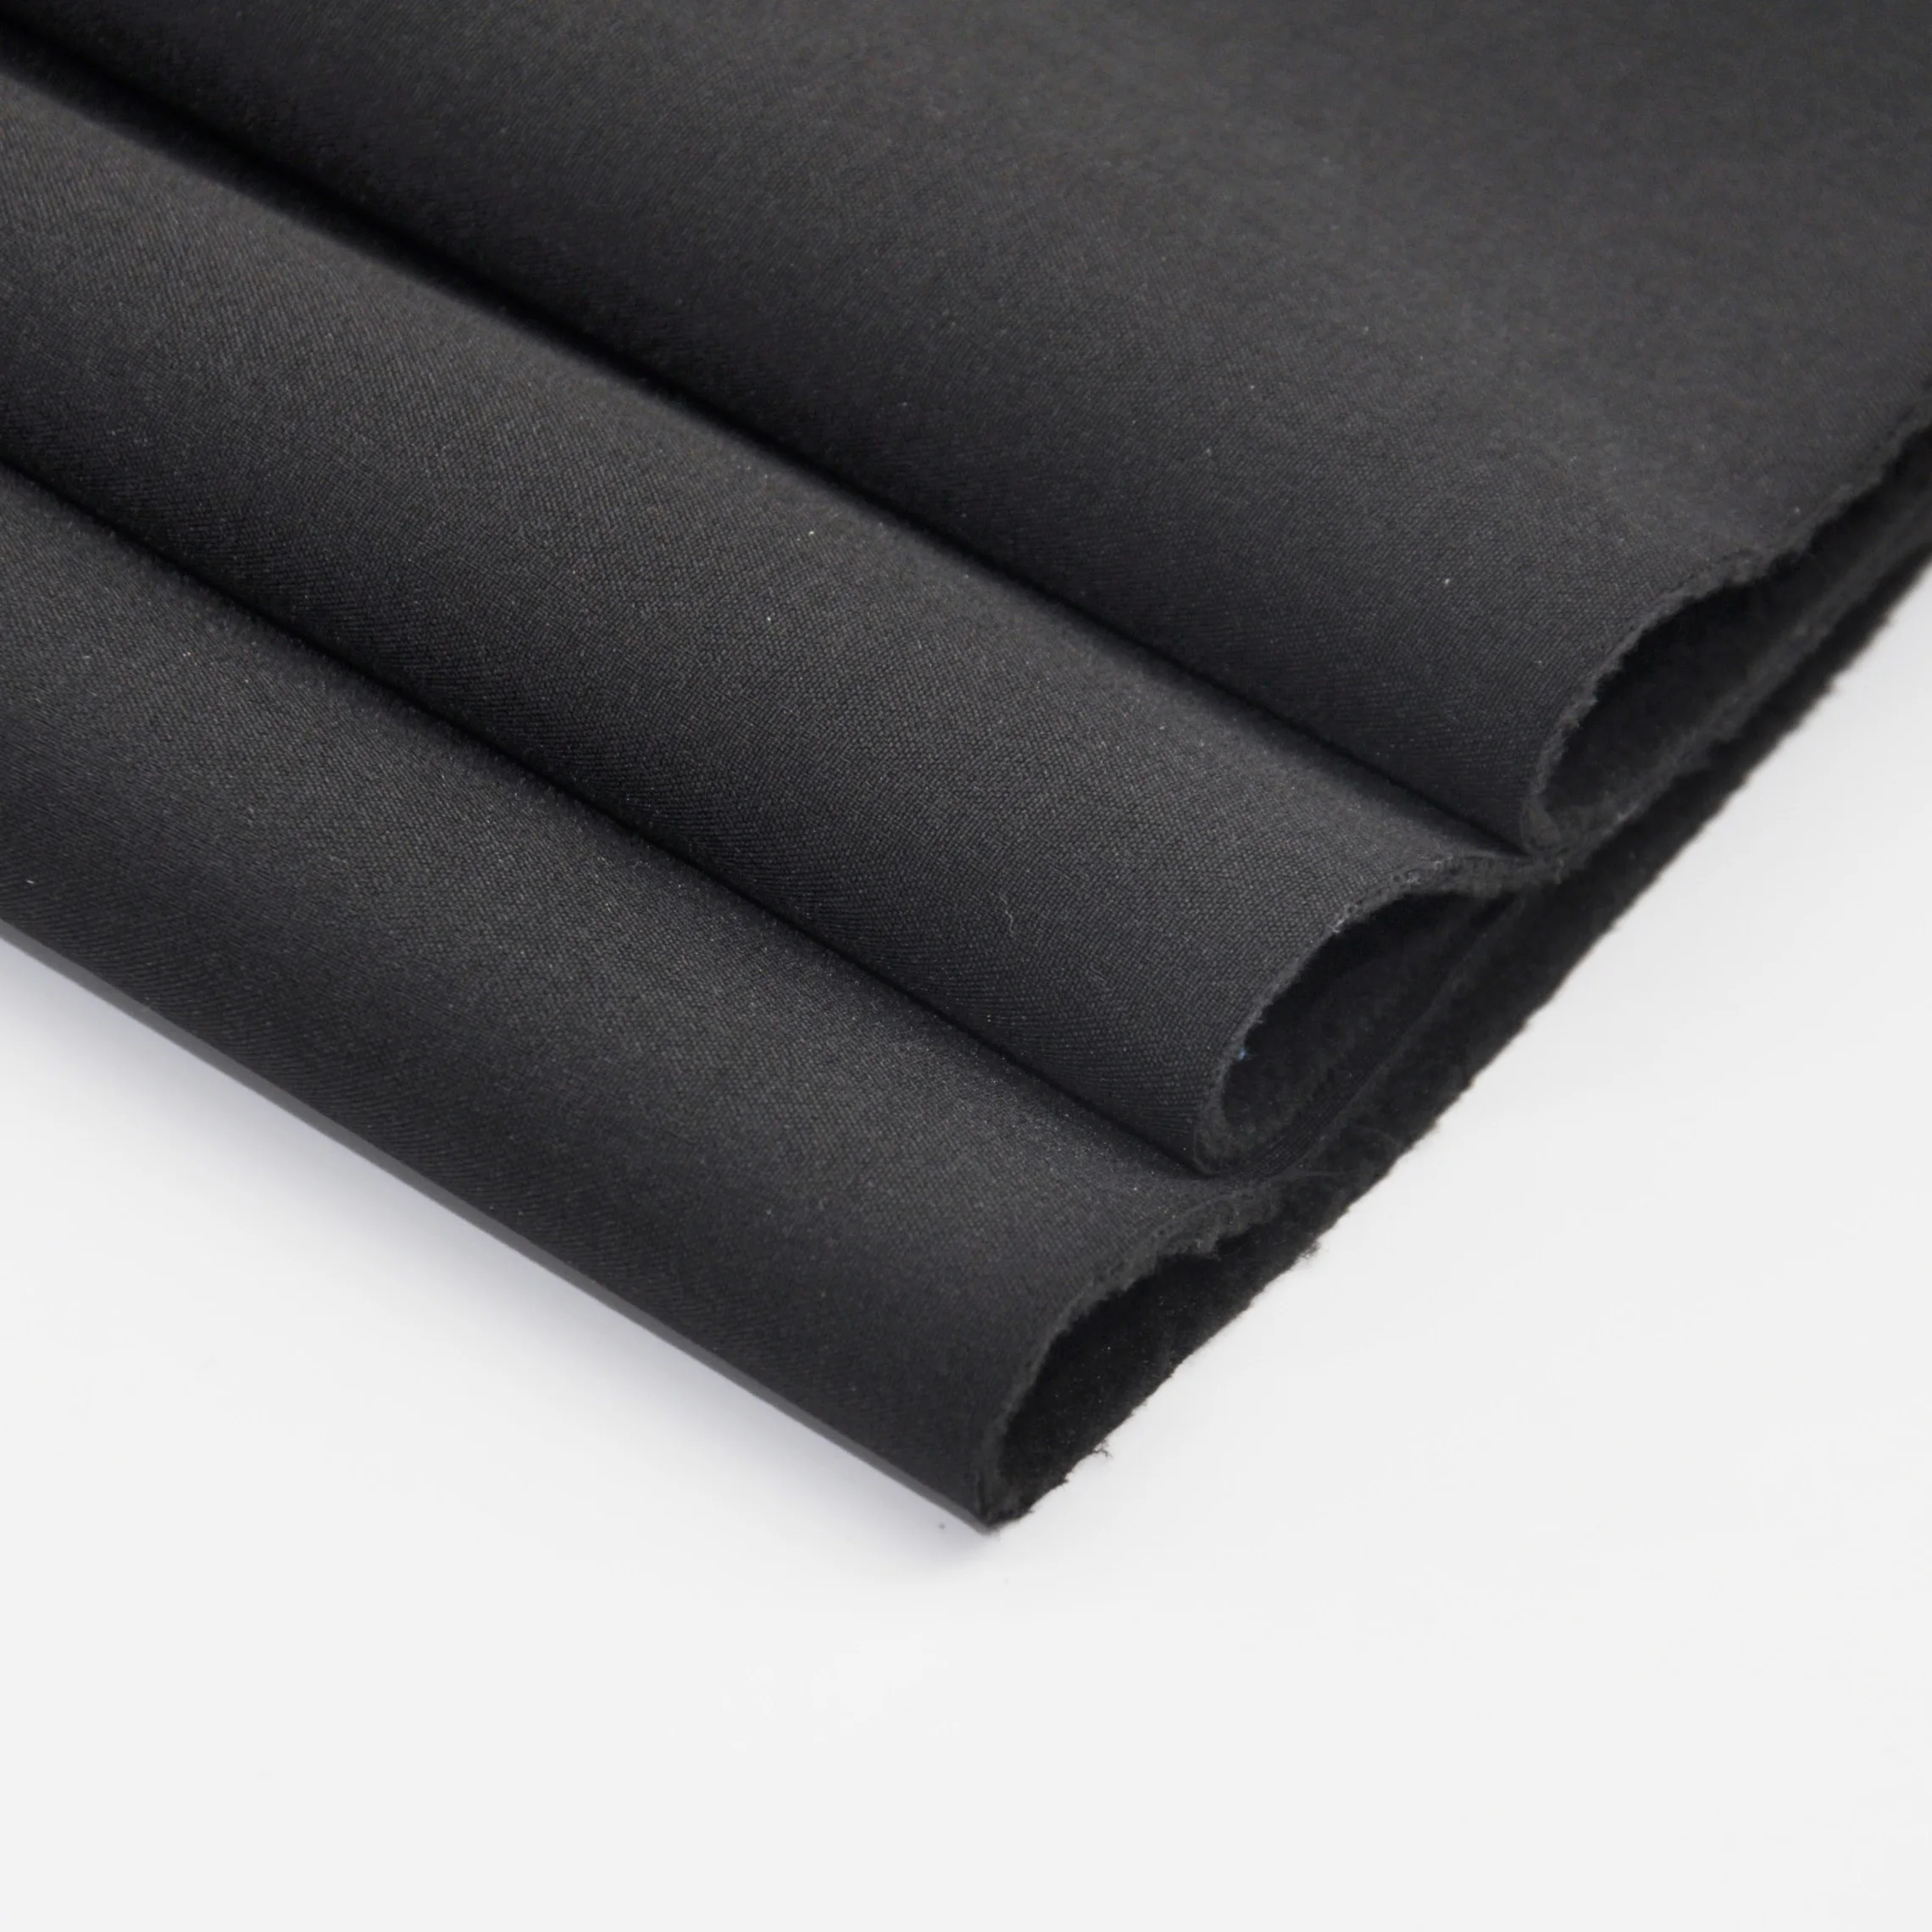 
softshell fabric 4 way stretch polyester spandex four way material 